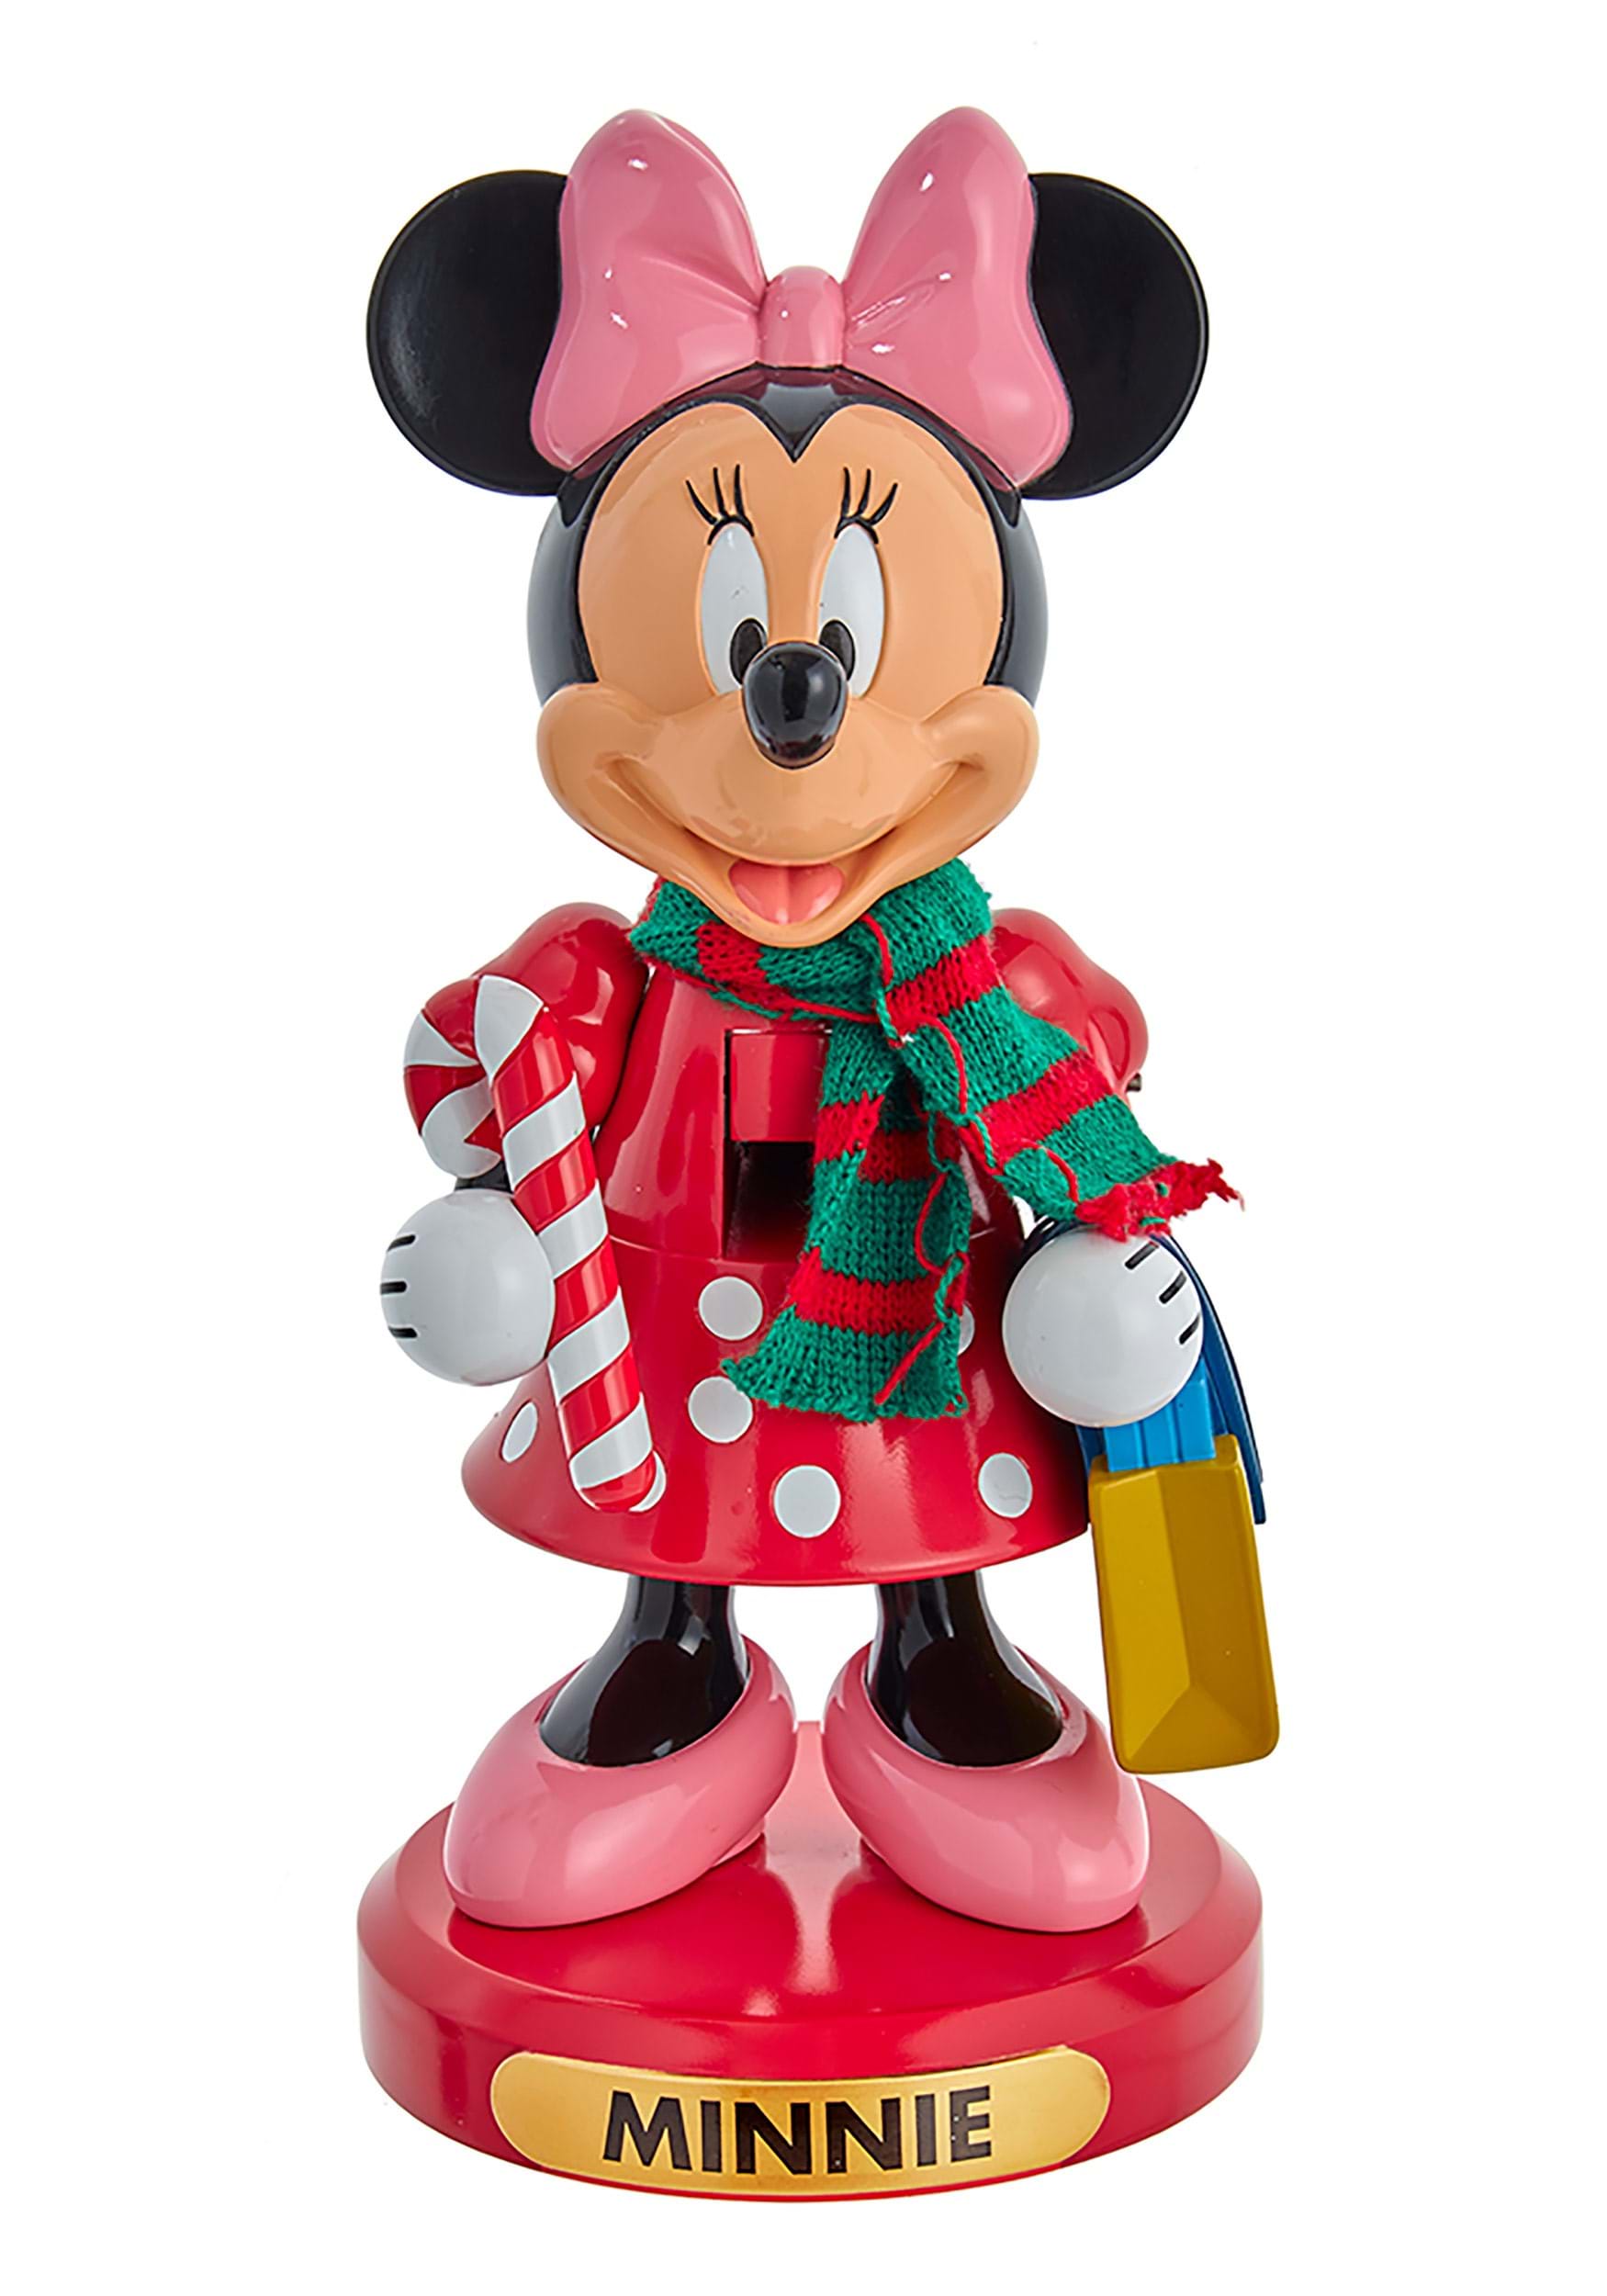 10 Inch Minnie Mouse With Candy Cane Nutcracker , Disney Christmas Decorations